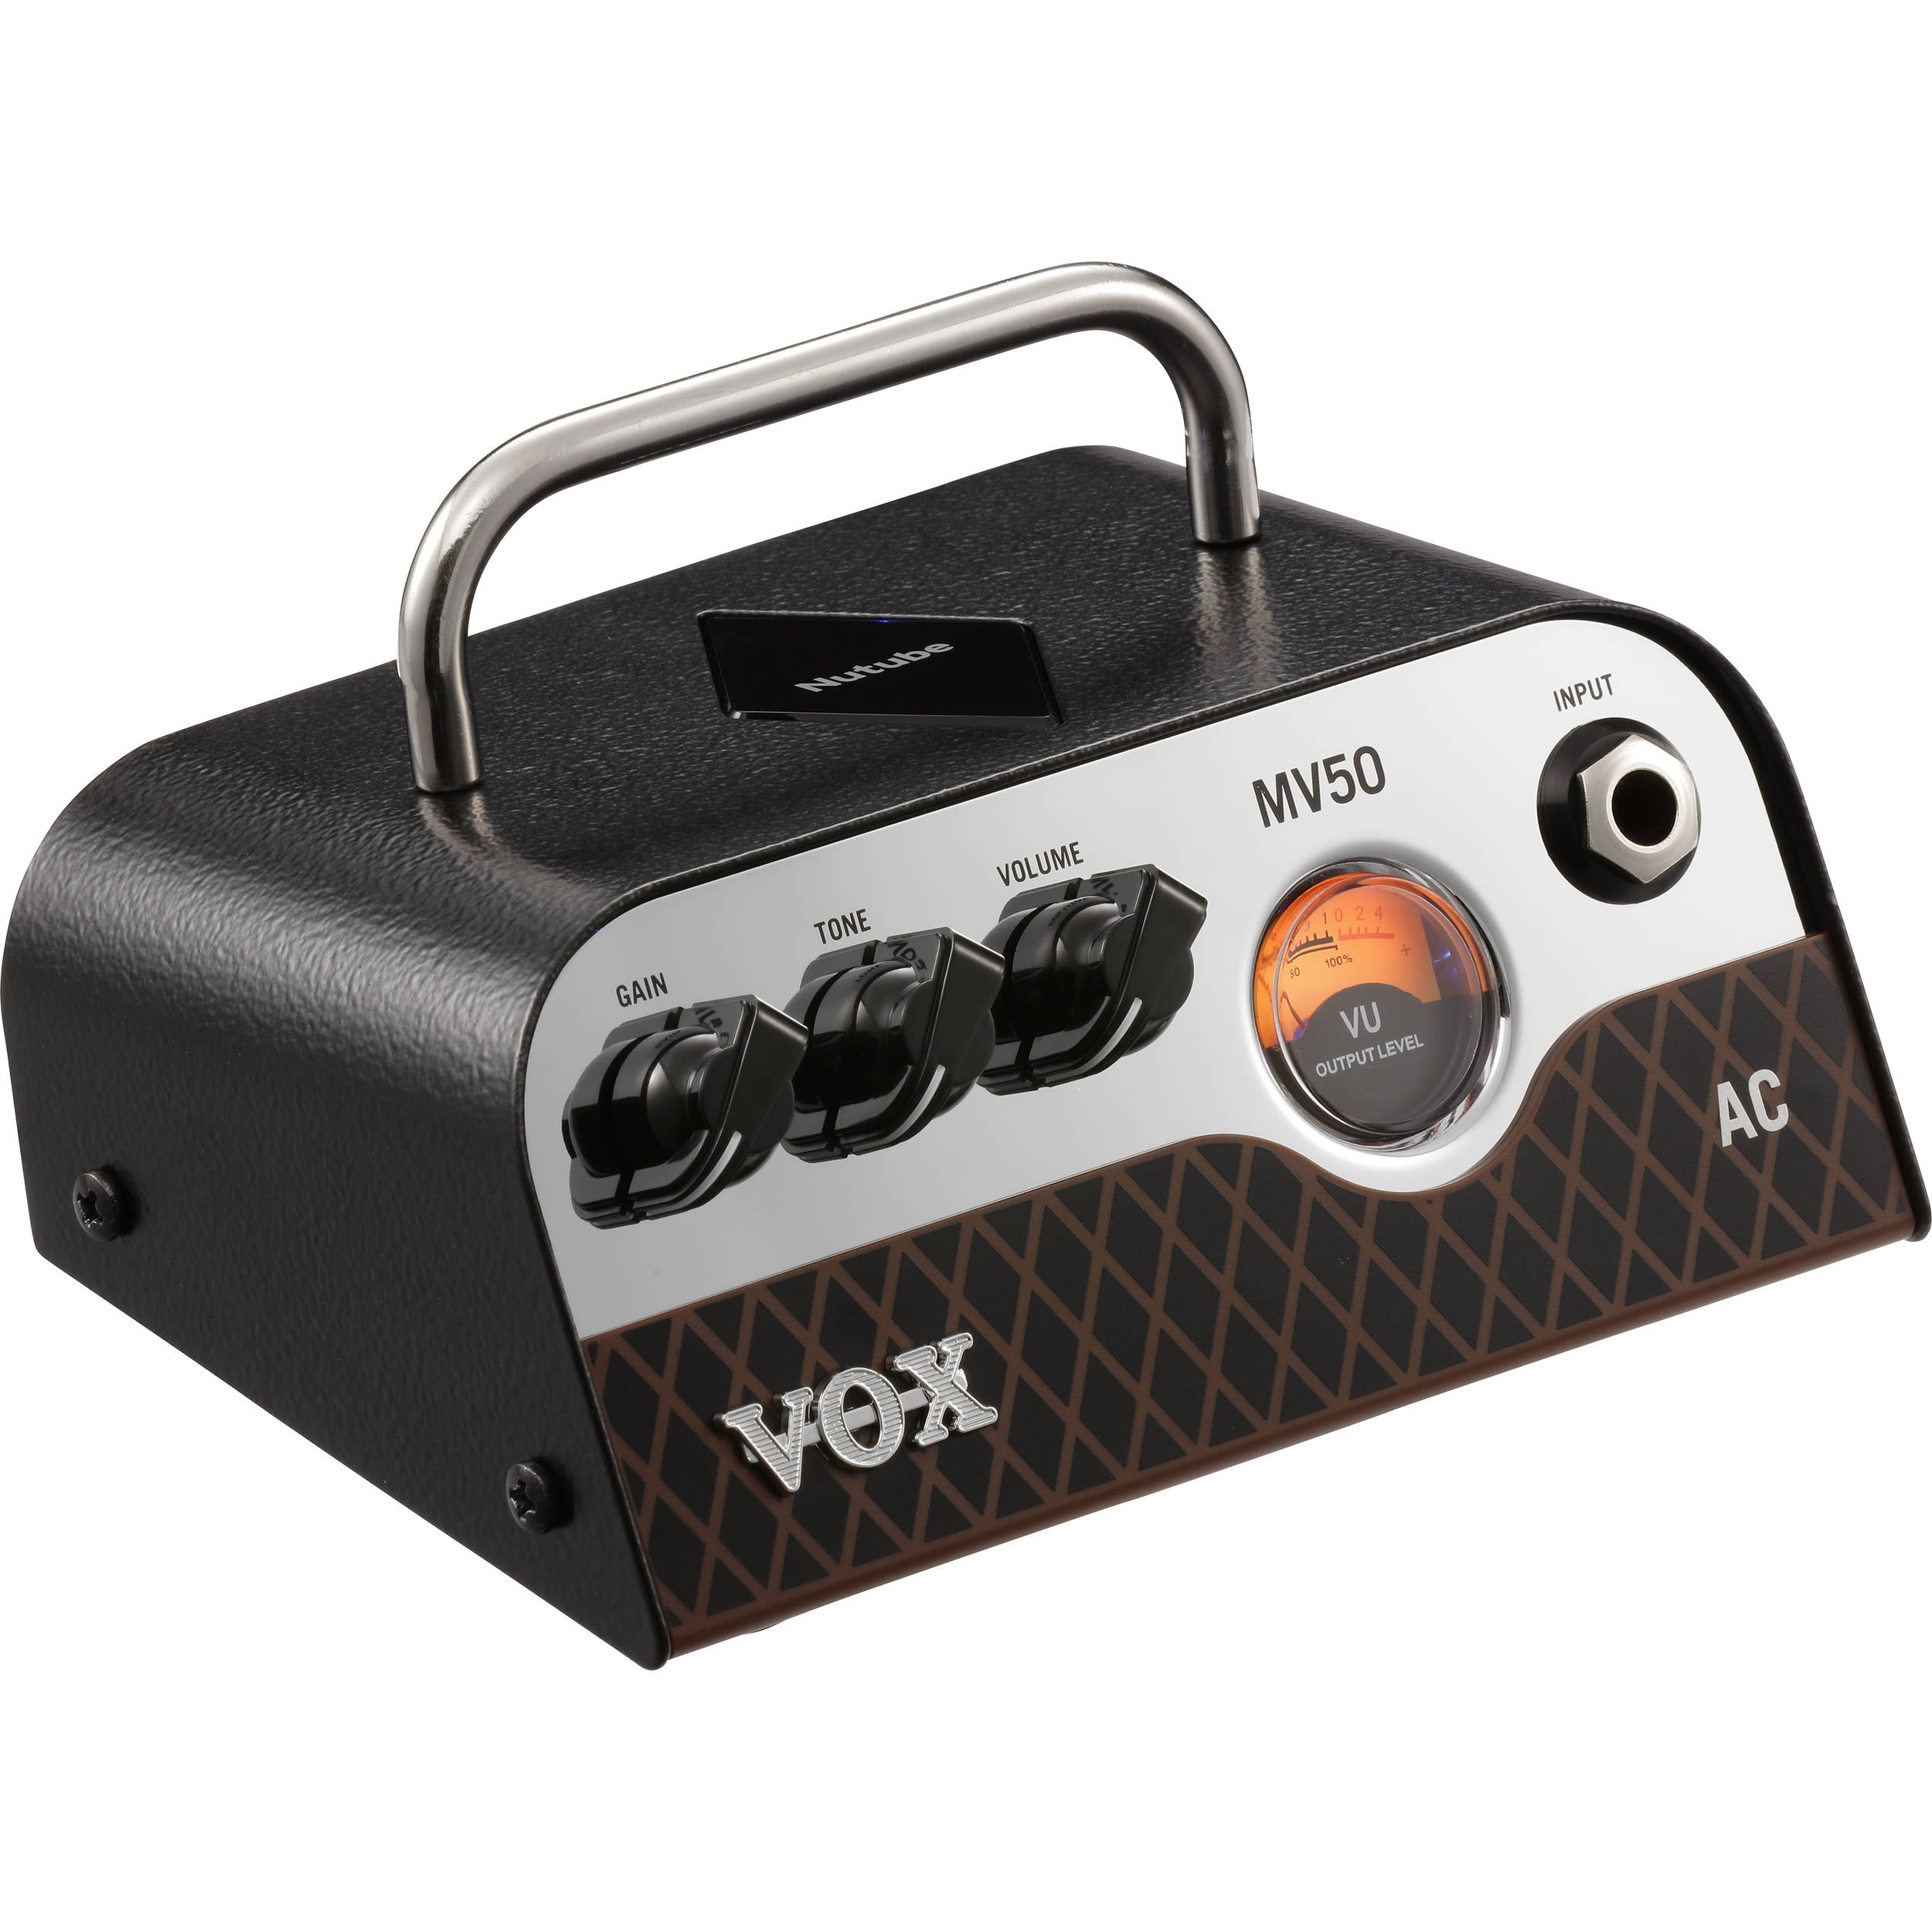 VOX MV50 AC 50W Amplifier Head with Nutube Preamp Technology